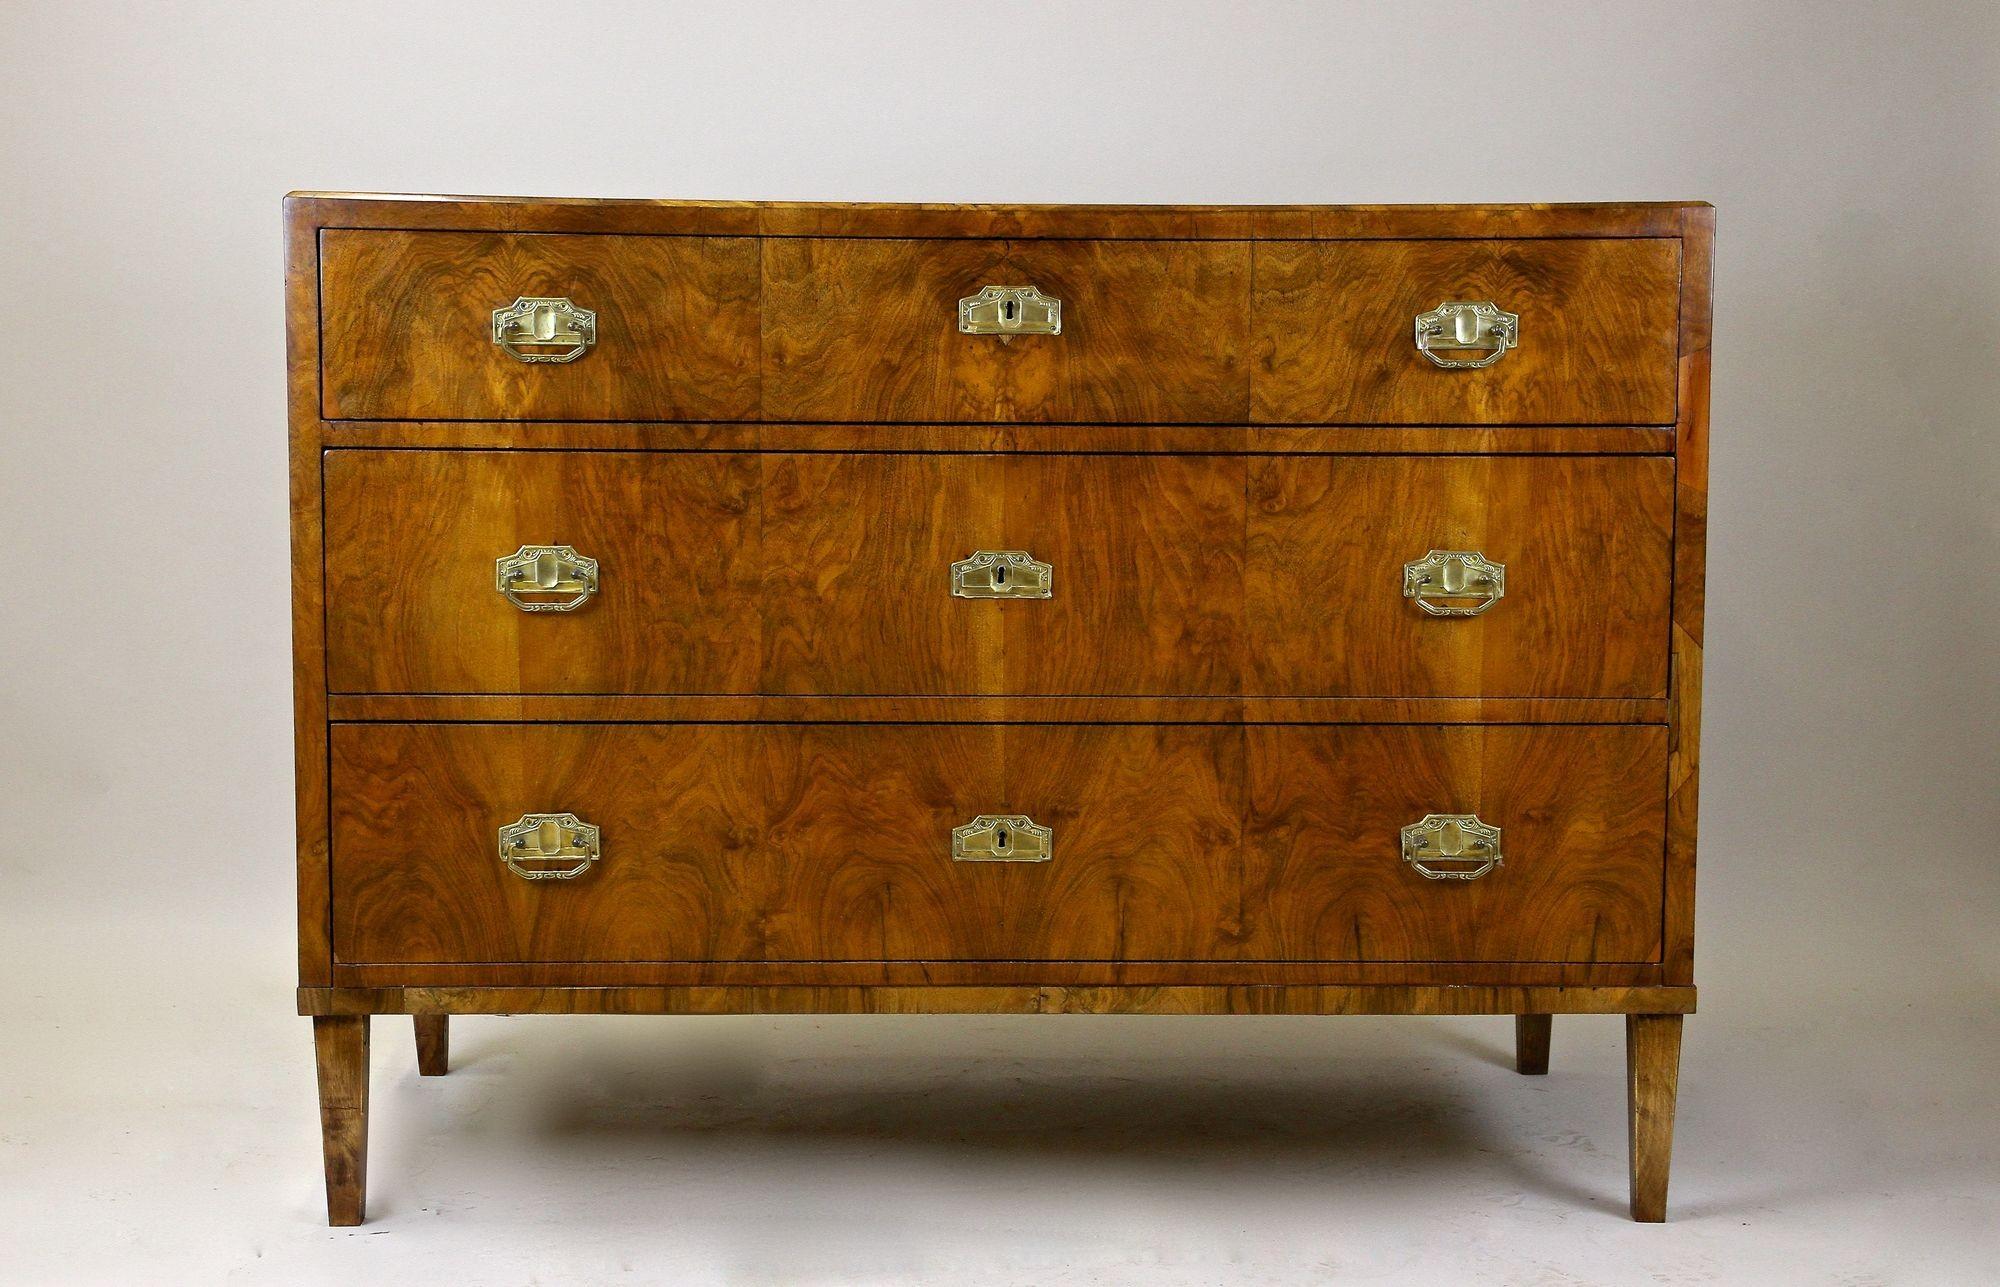 Remarkable Austrian Biedermeier chest of drawers/ writing commode veneered with finest nut wood from the period in Austria around 1840. Impressing with an absolutely amazing looking grain, this completely restored four drawer commode is a real